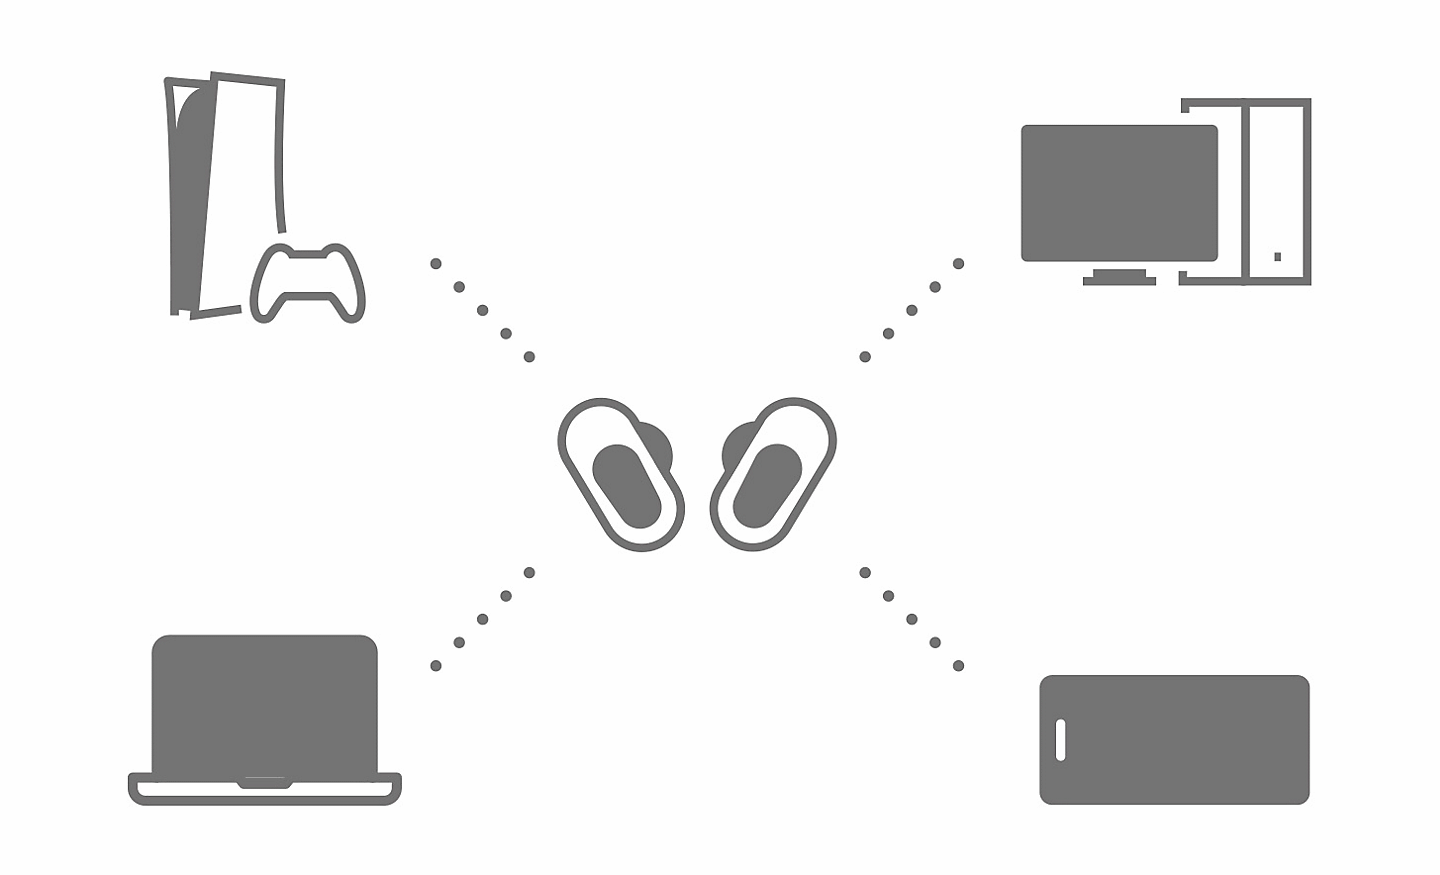 Diagram showing the INZONE Buds connected to a range of devices